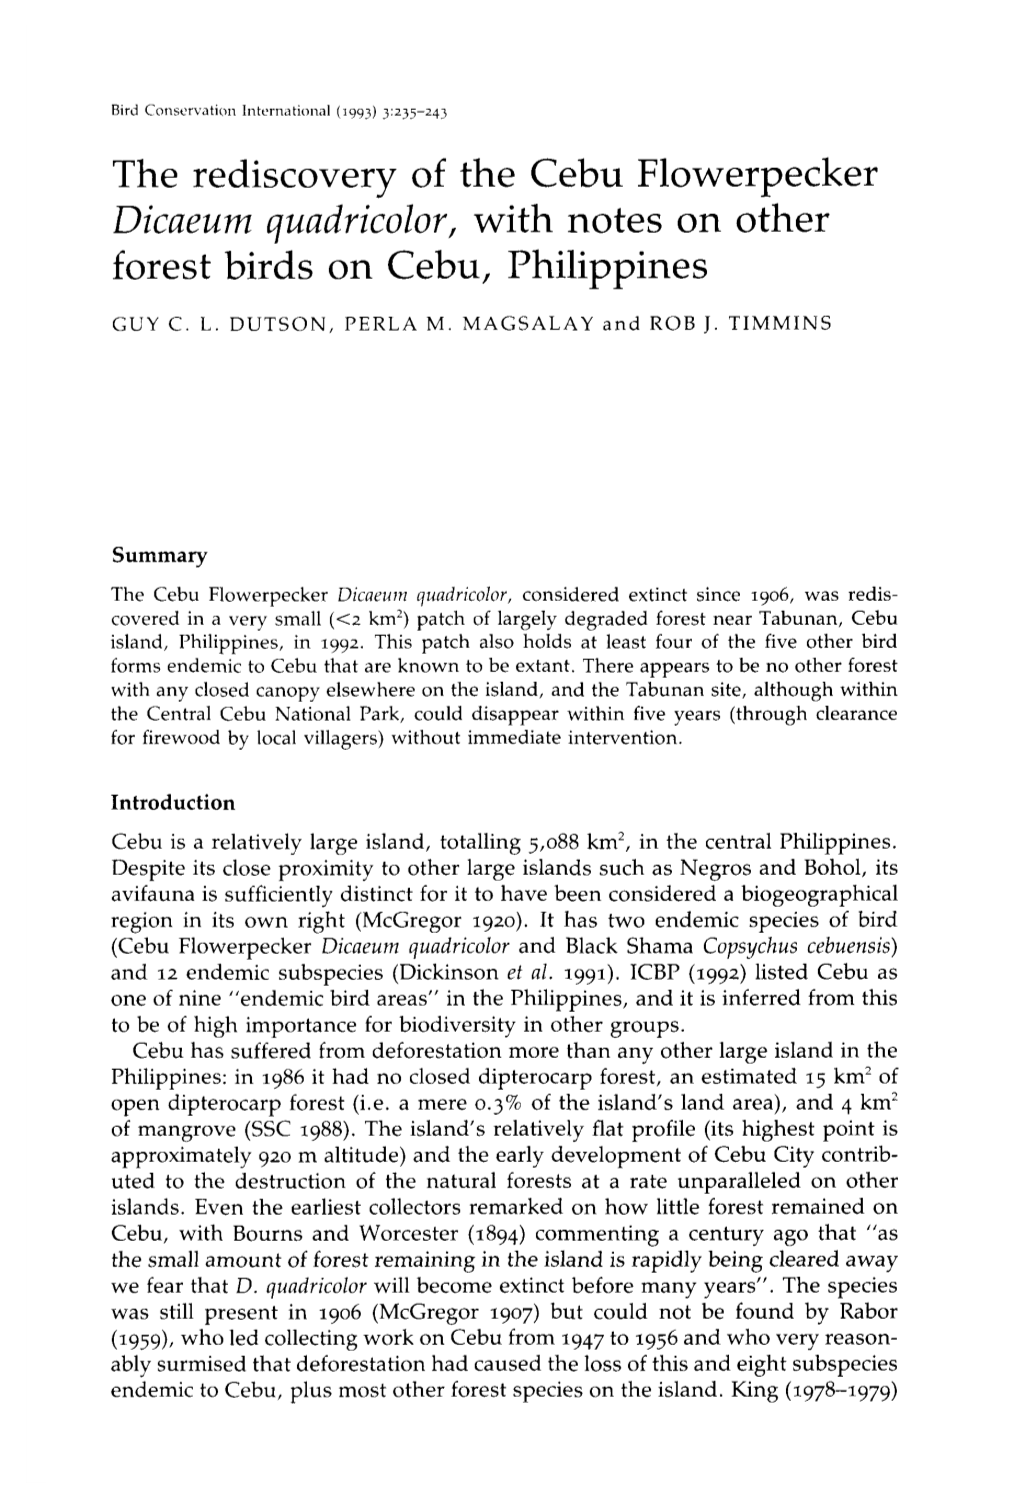 The Rediscovery of the Cebu Flowerpecker Dicaeum Quadricolor, with Notes on Other Forest Birds on Cebu, Philippines